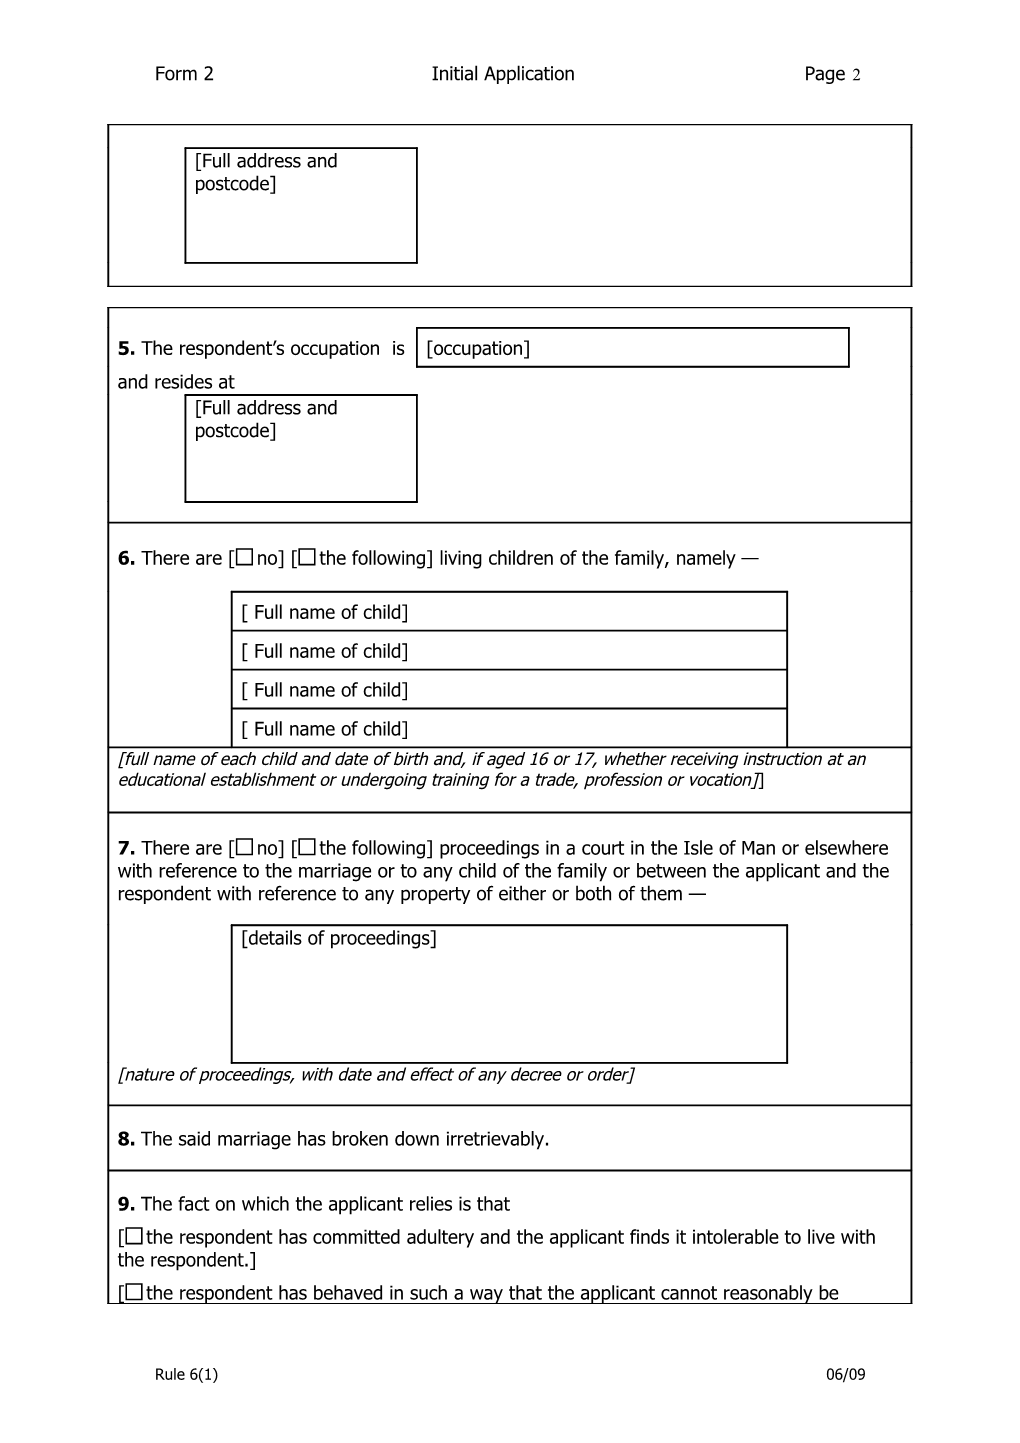 Form 2 Initial Application Page 1